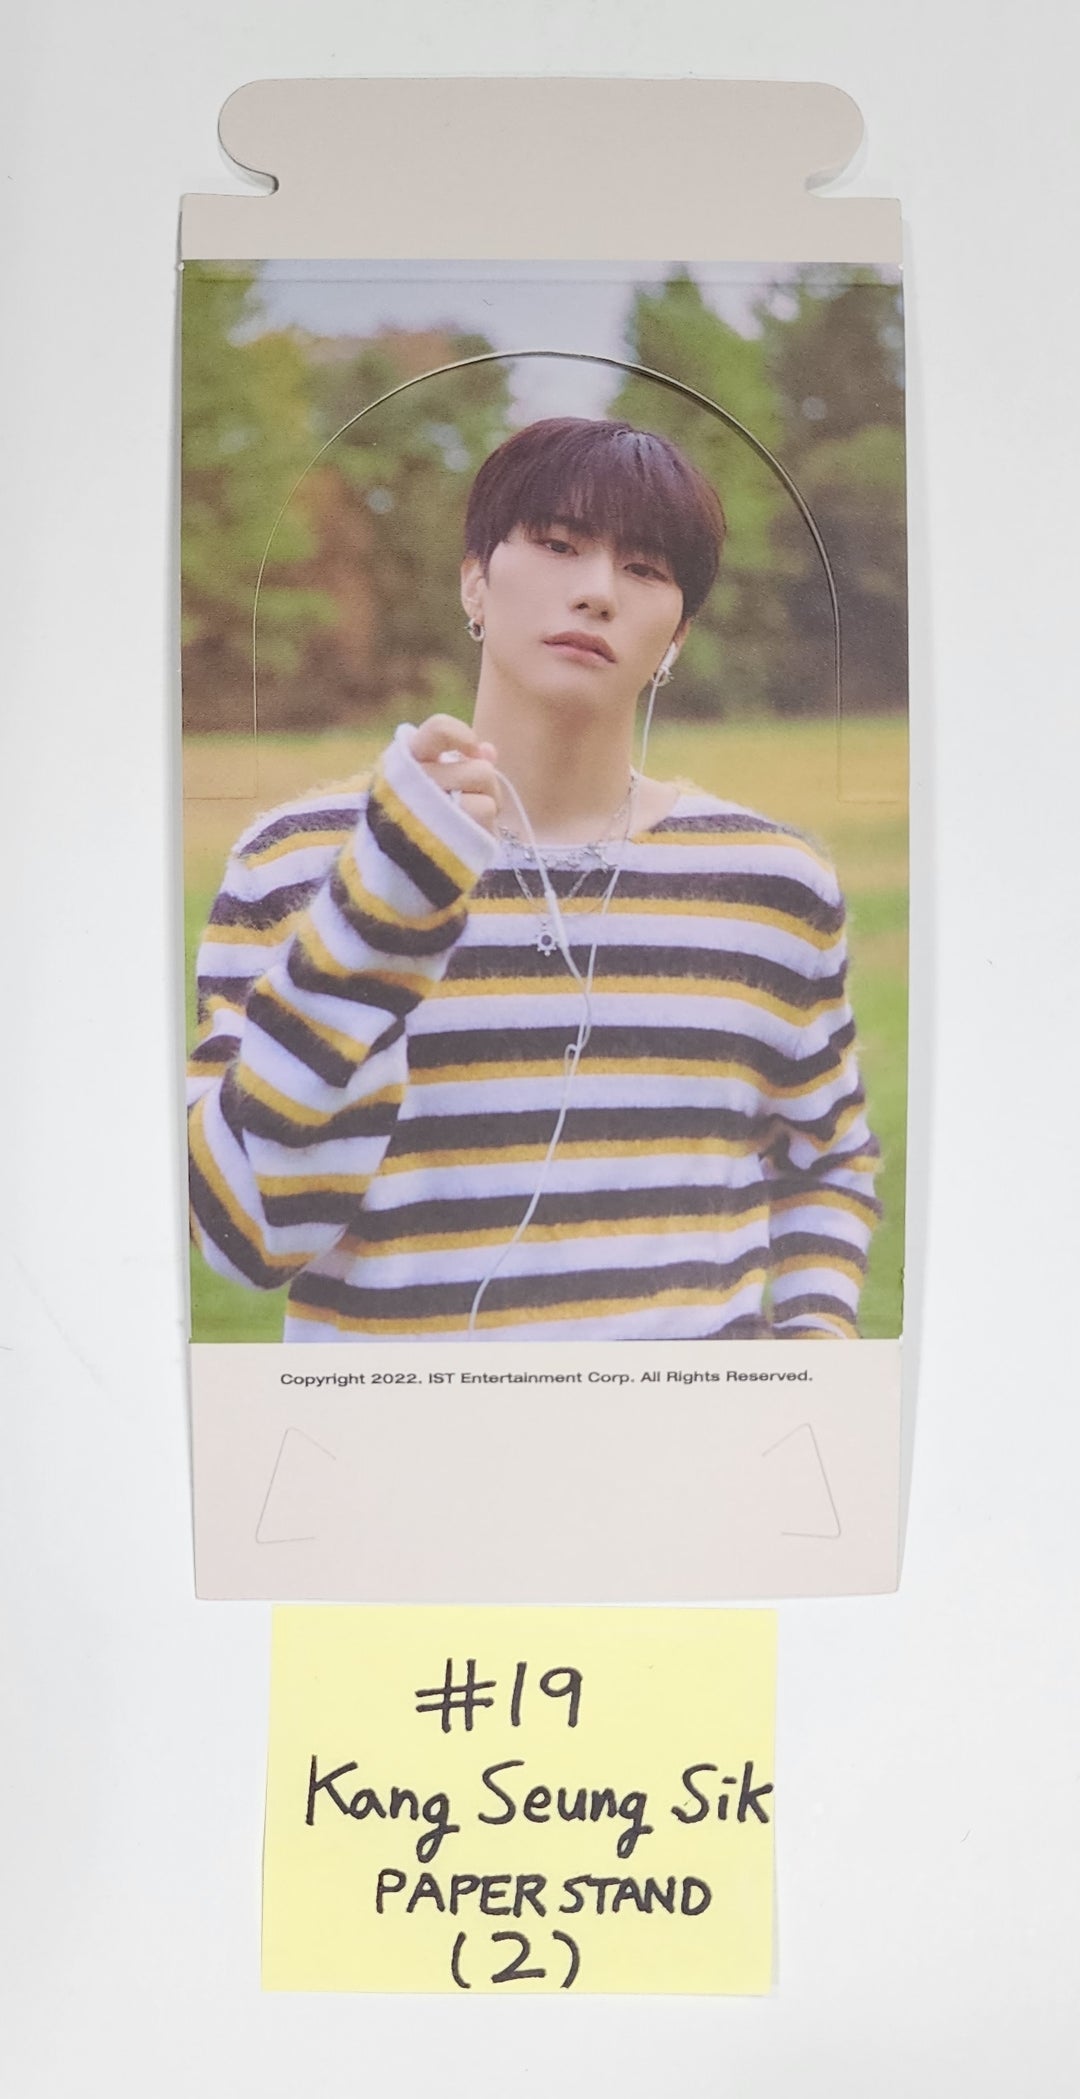 Victon "choice" - Official Photocard, Paper Stand, Key Ring